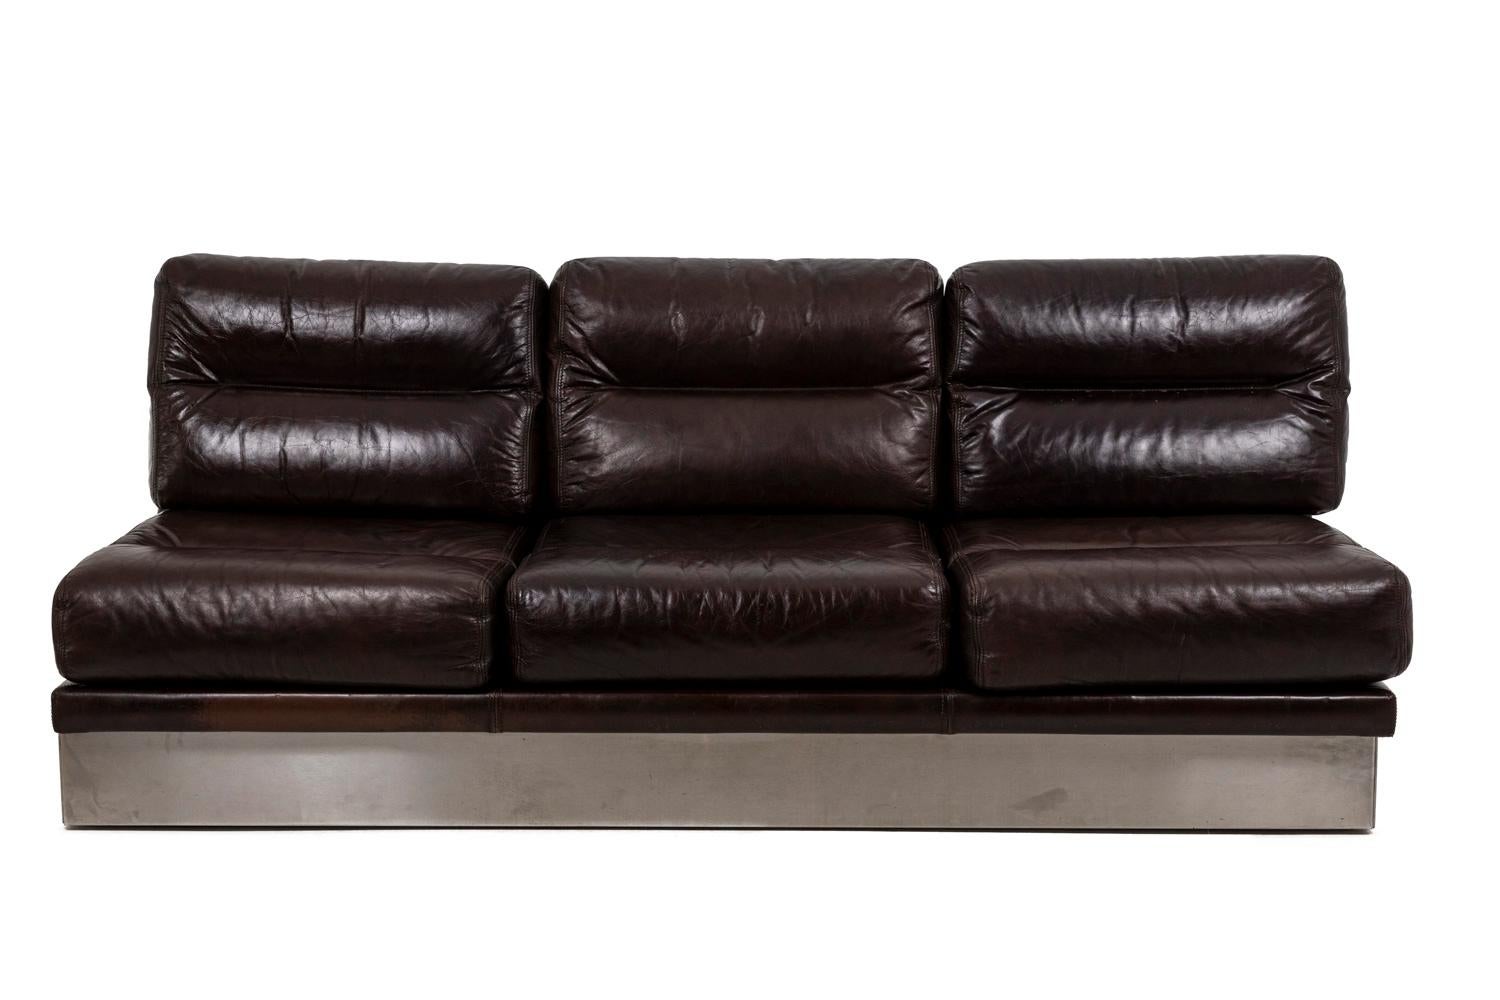 Modern Jacques Charpentier, Sofa in leather 